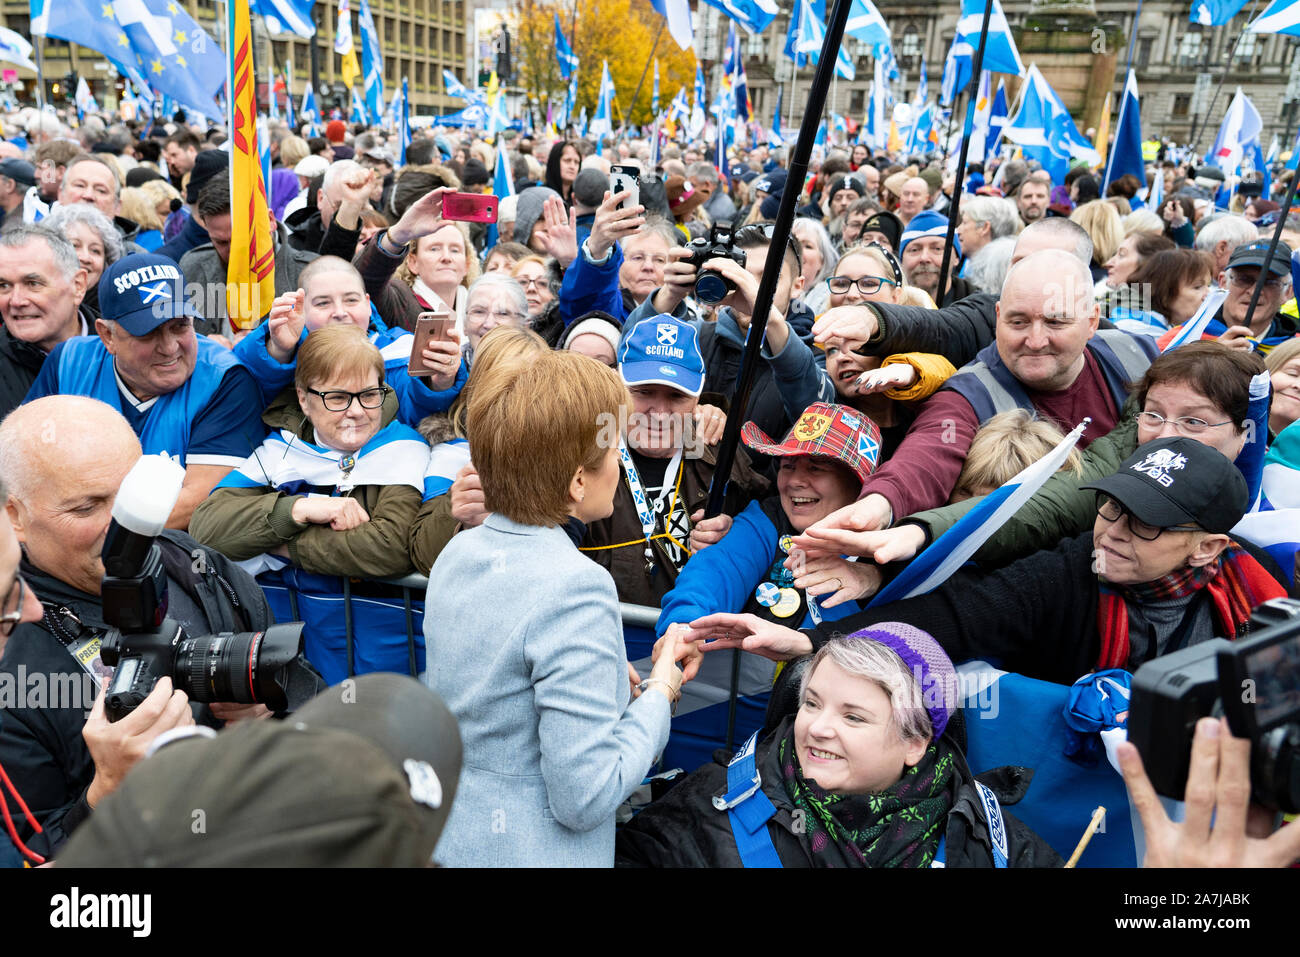 Scotland, UK. 2nd November 2019. Supporters of Scottish nationalism attend a rally in George Square Glasgow. The rally was organised by The National newspaper, the Scottish pro-Nationalism newspaper. First Minister Nicola Sturgeon addressed the rally.  Iain Masterton/Alamy Live News. Stock Photo